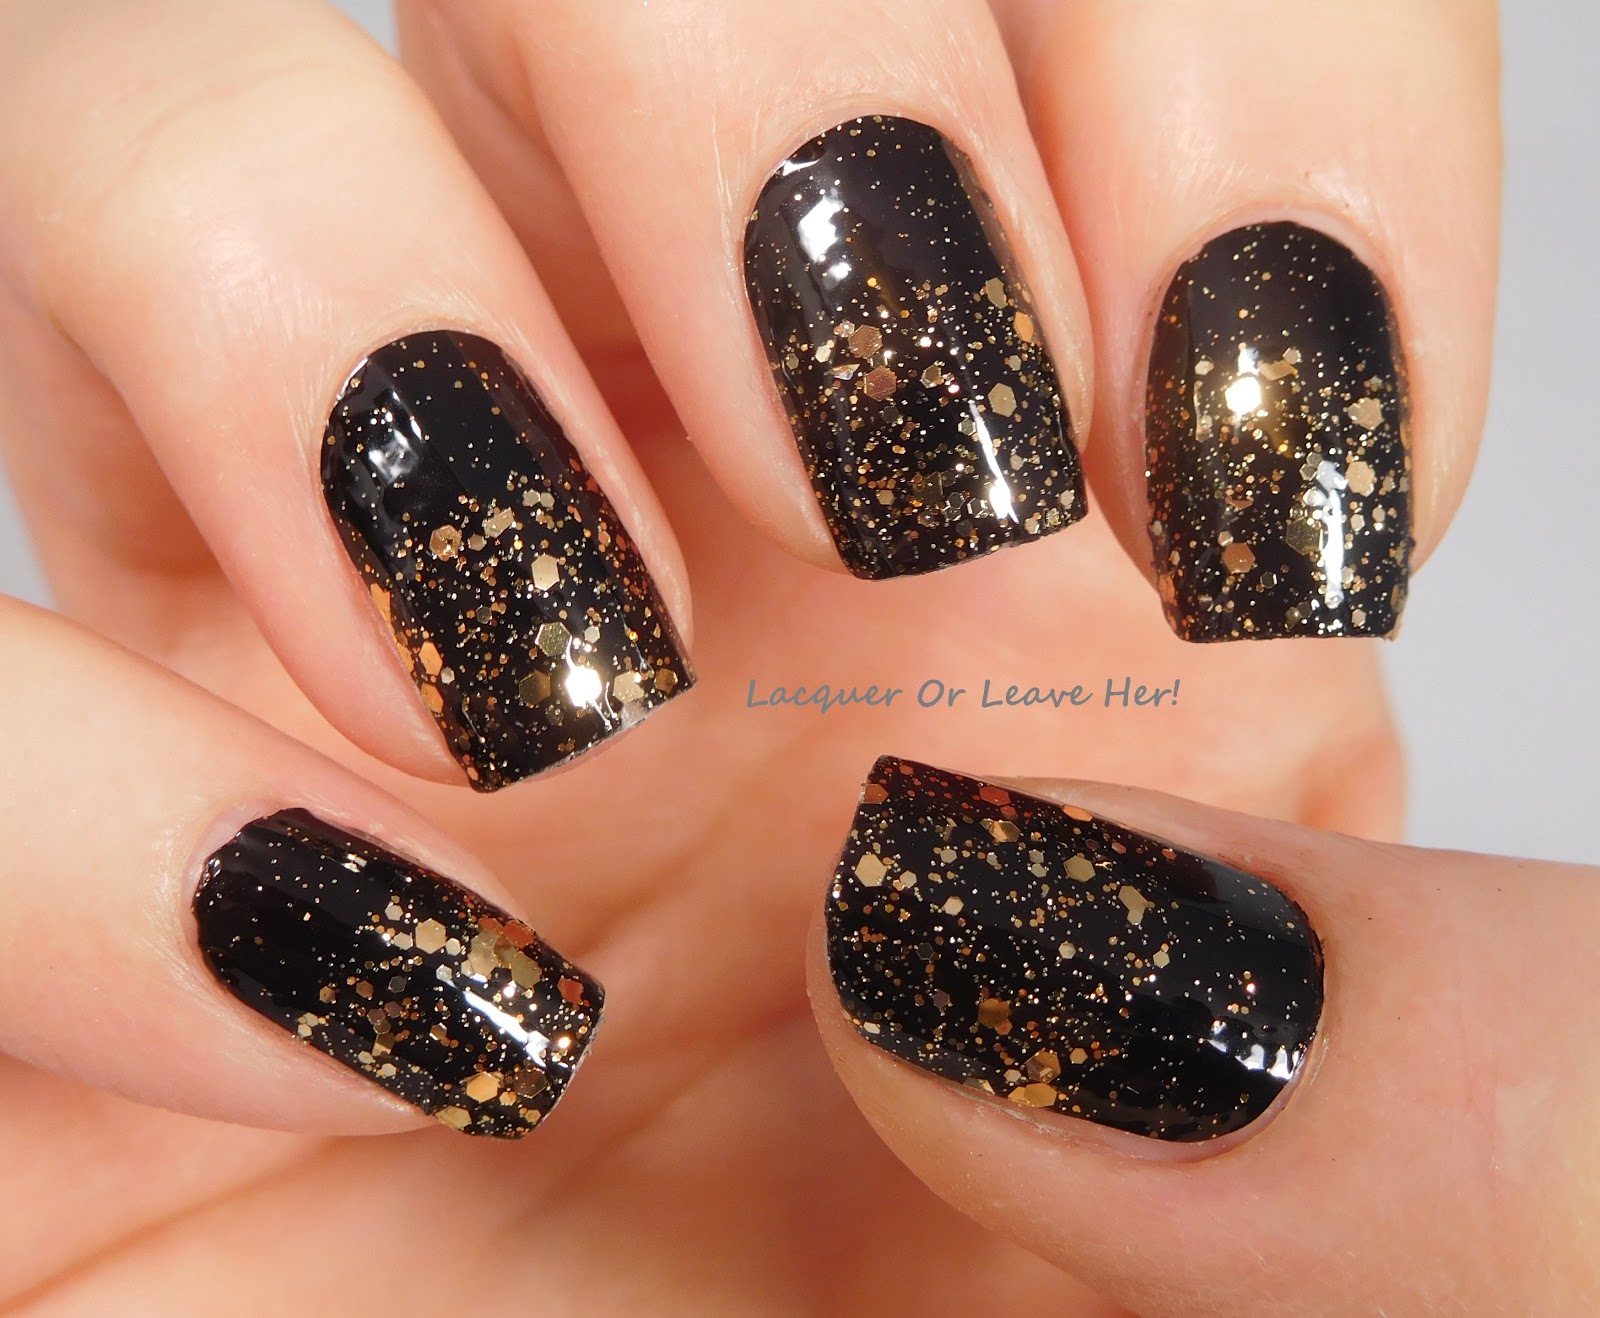 Lacquer or Leave Her!: Review: Selections from Incoco's Ever After ...